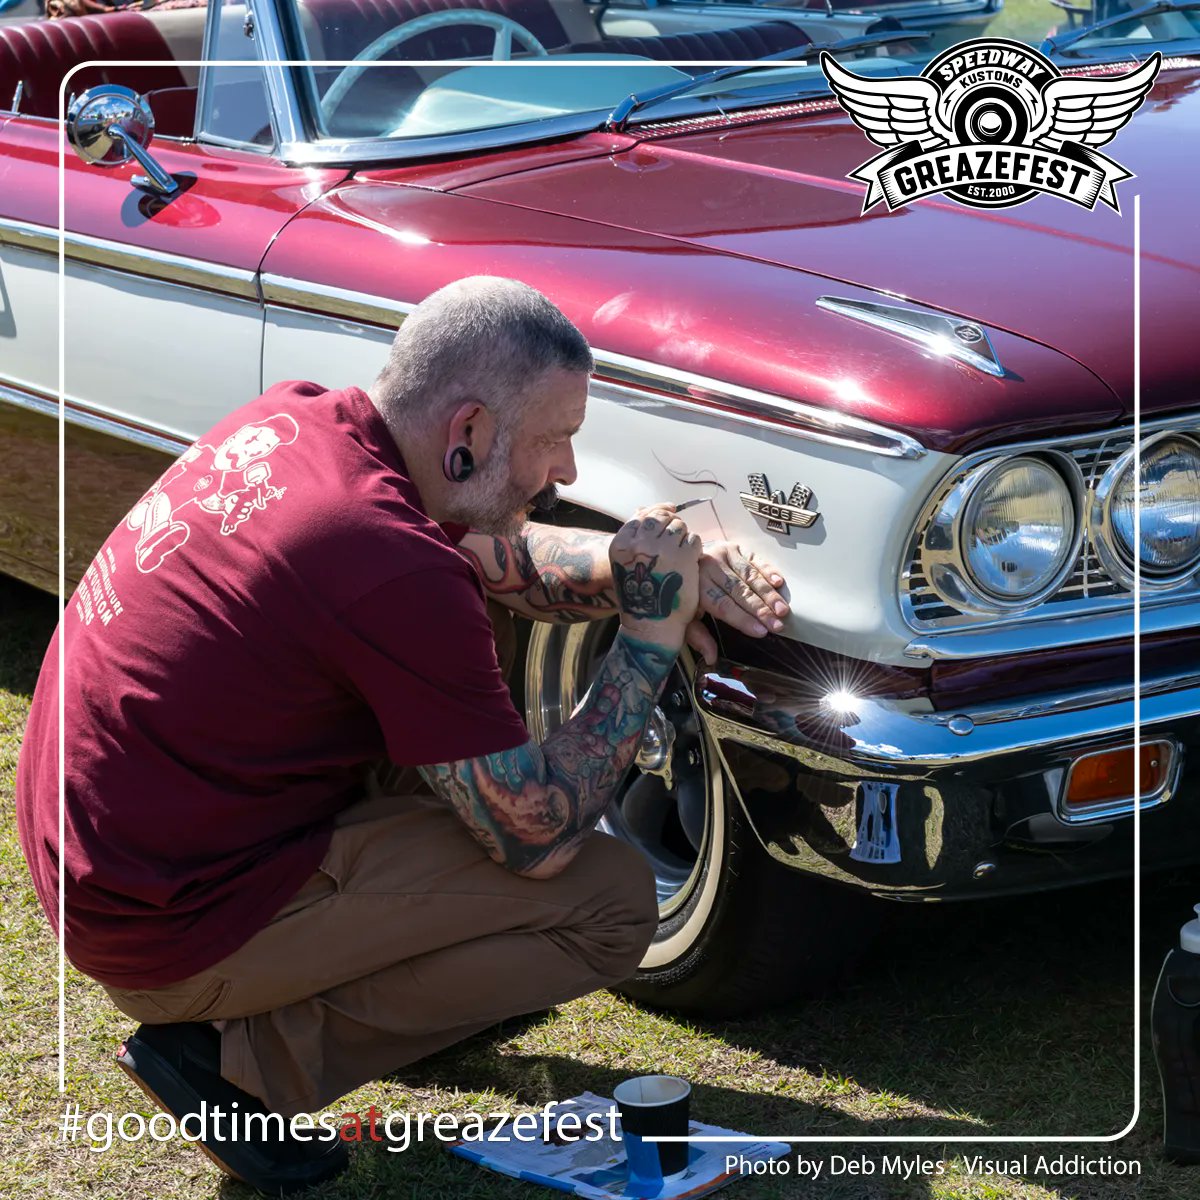 Looking back to the good times at GreazeFest 2023, Kane'o Custom Kreations laying some fresh stripes, photographed by Deb Myles, Visual Addiction.

#greazefest #greazefest2023 #kustomkulture #goodtimesatgreazefest